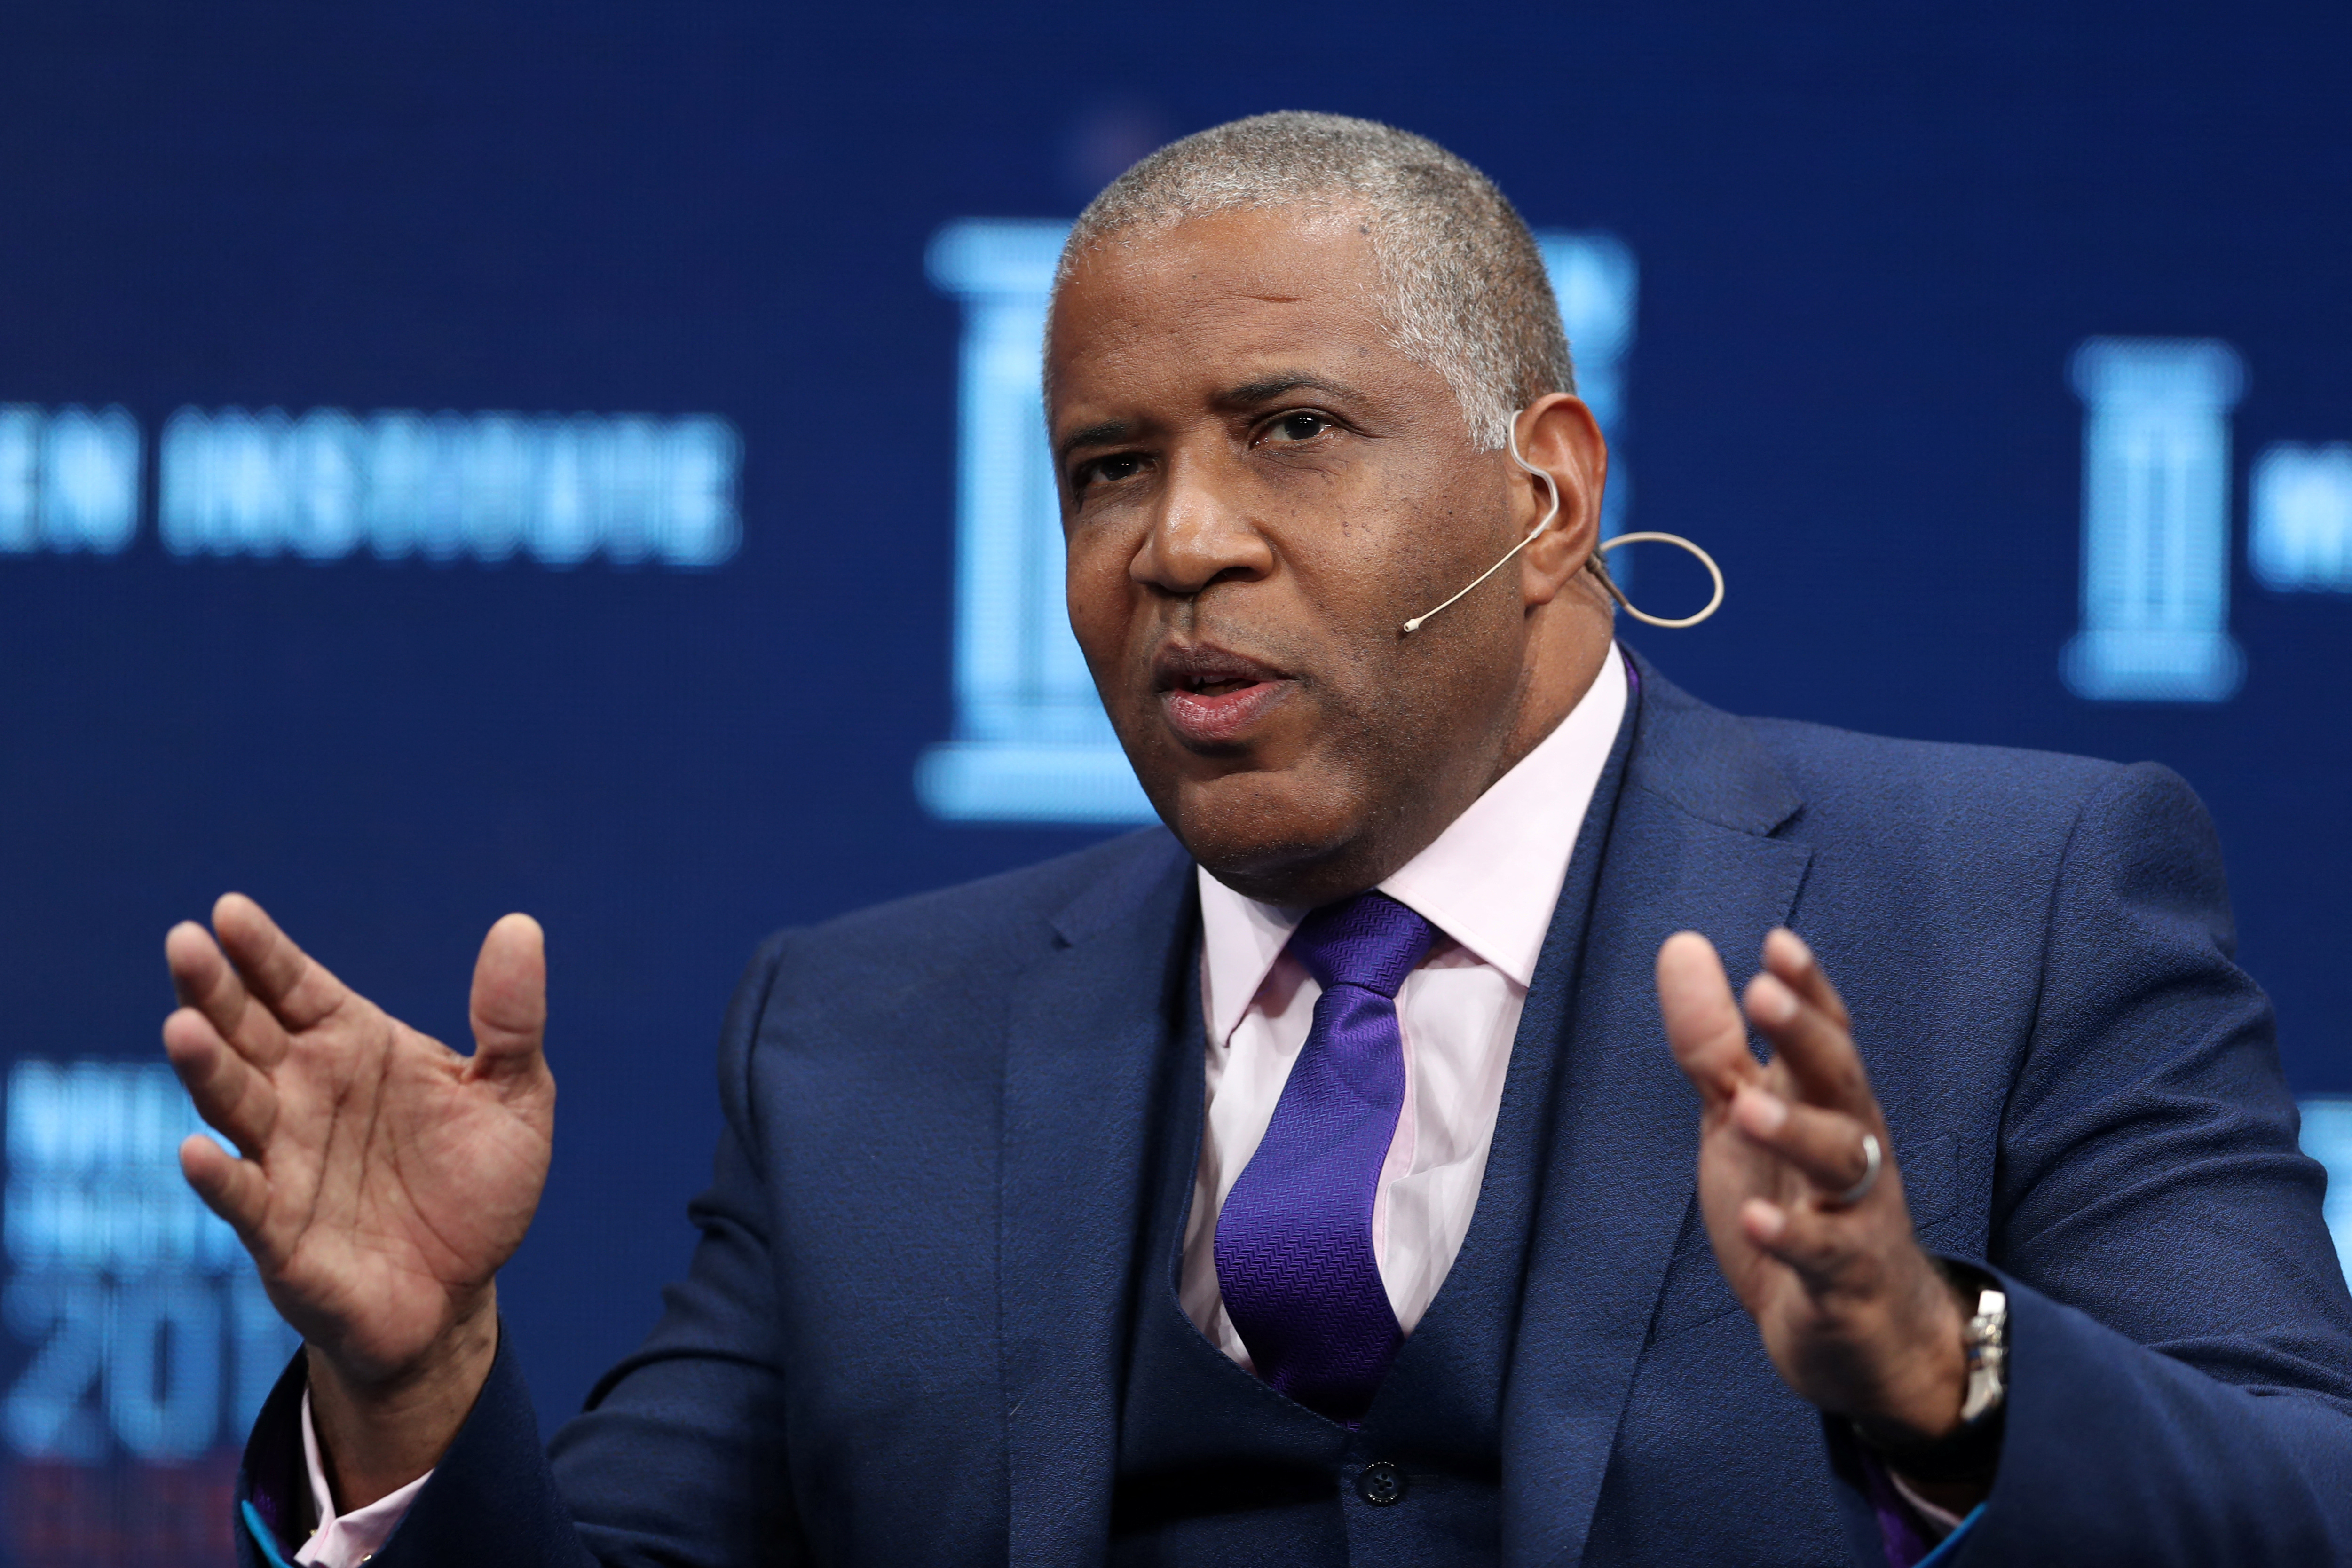 Robert Smith, Founder, Chairman and CEO, Vista Equity Partners, speaks at the Milken Institute's 21st Global Conference in Beverly Hills